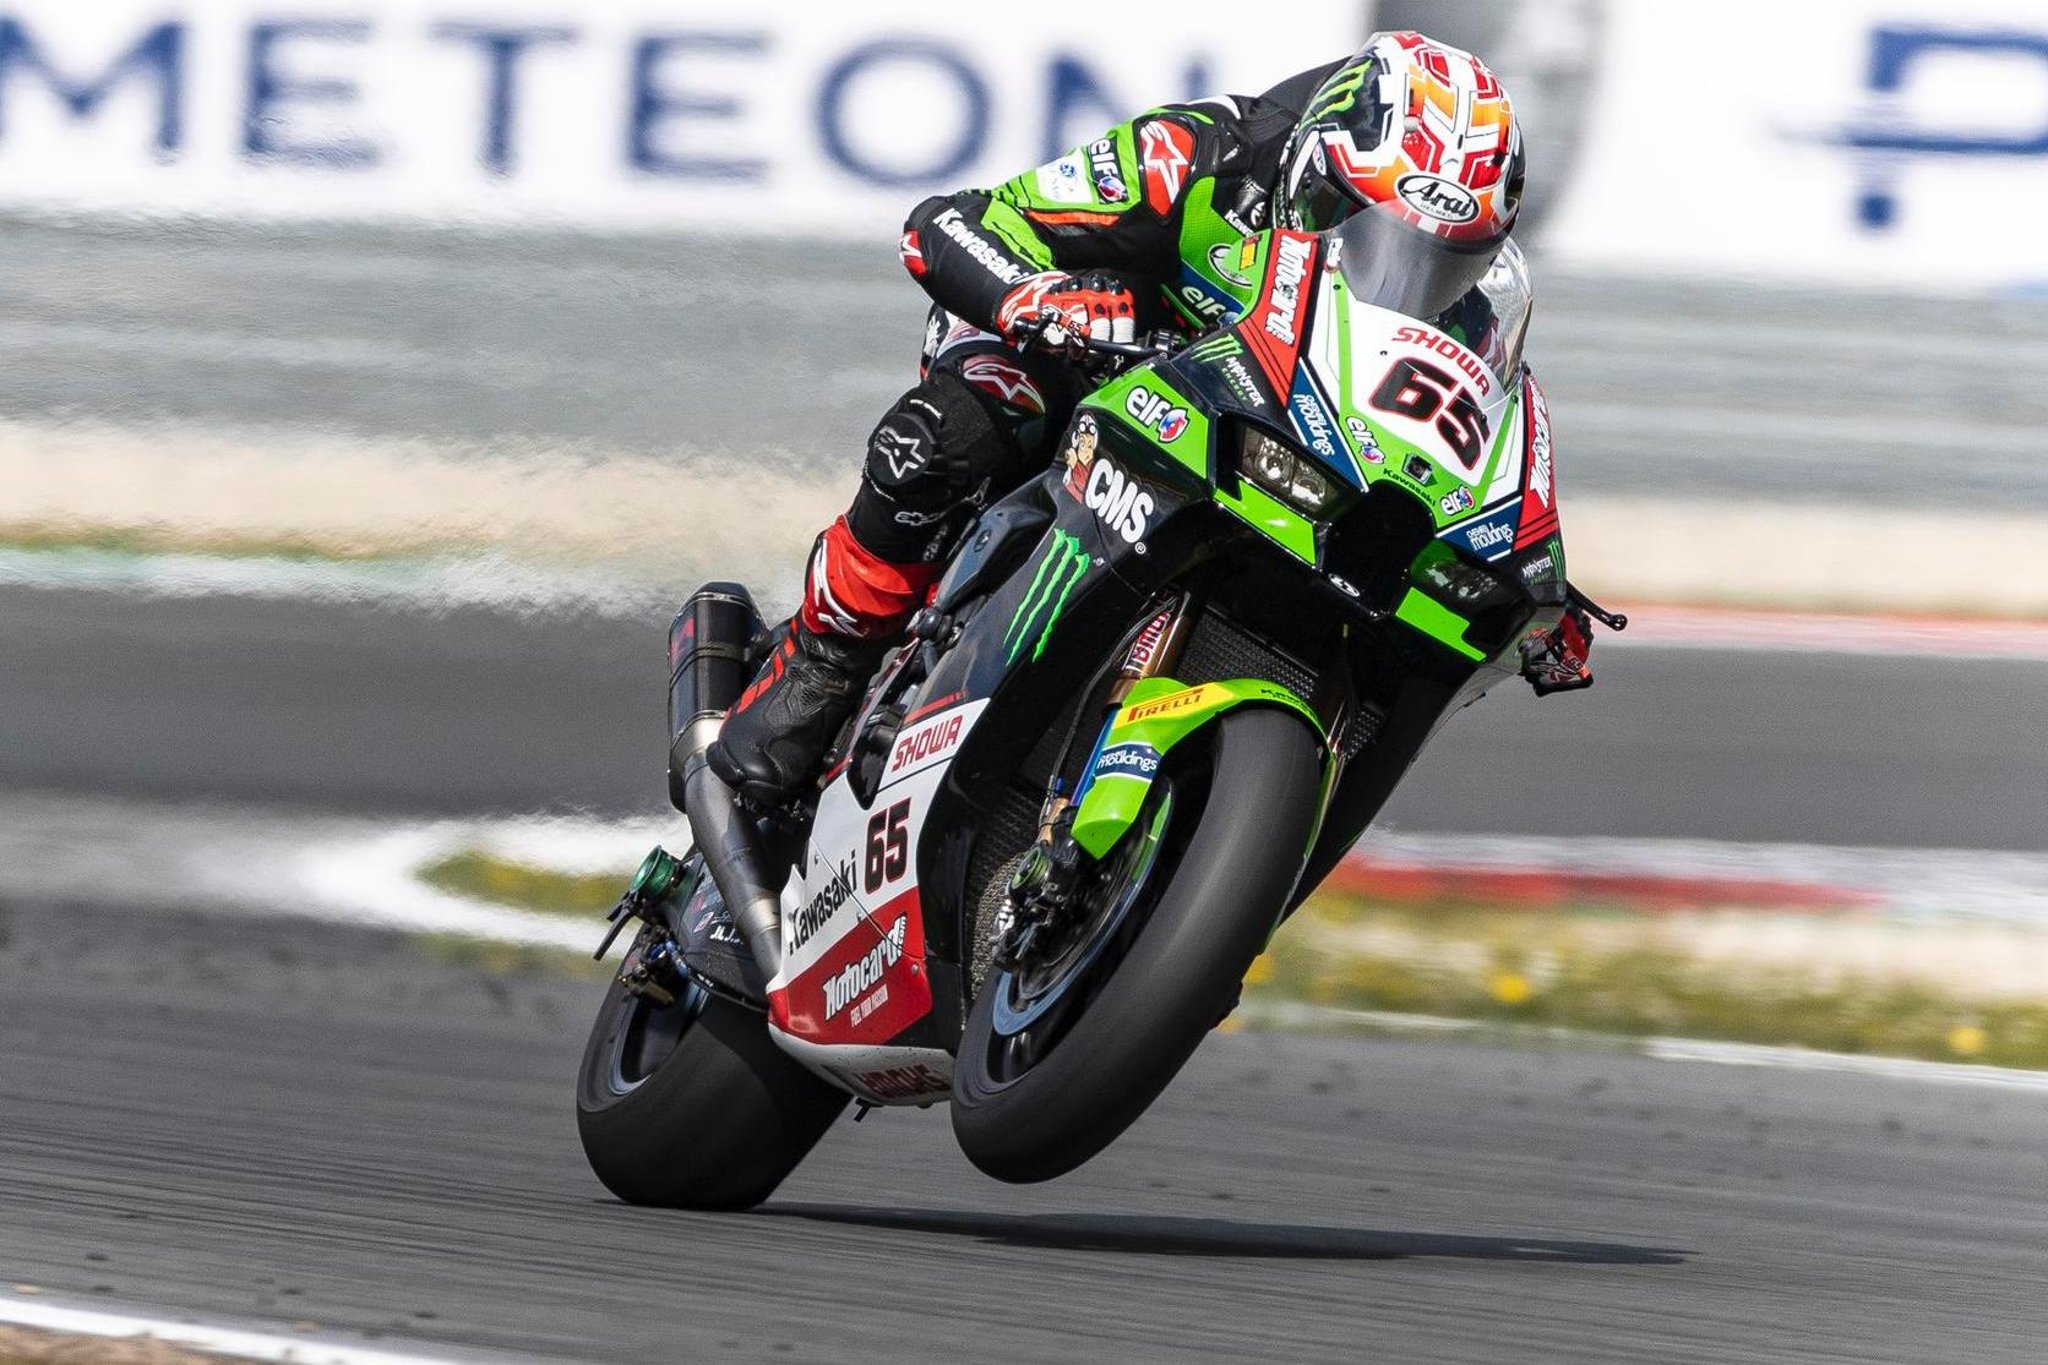 Jonathan Rea &#8216;having nightmares&#8217; over long straight and Ducati top-speed edge ahead of World Superbike round at Estoril